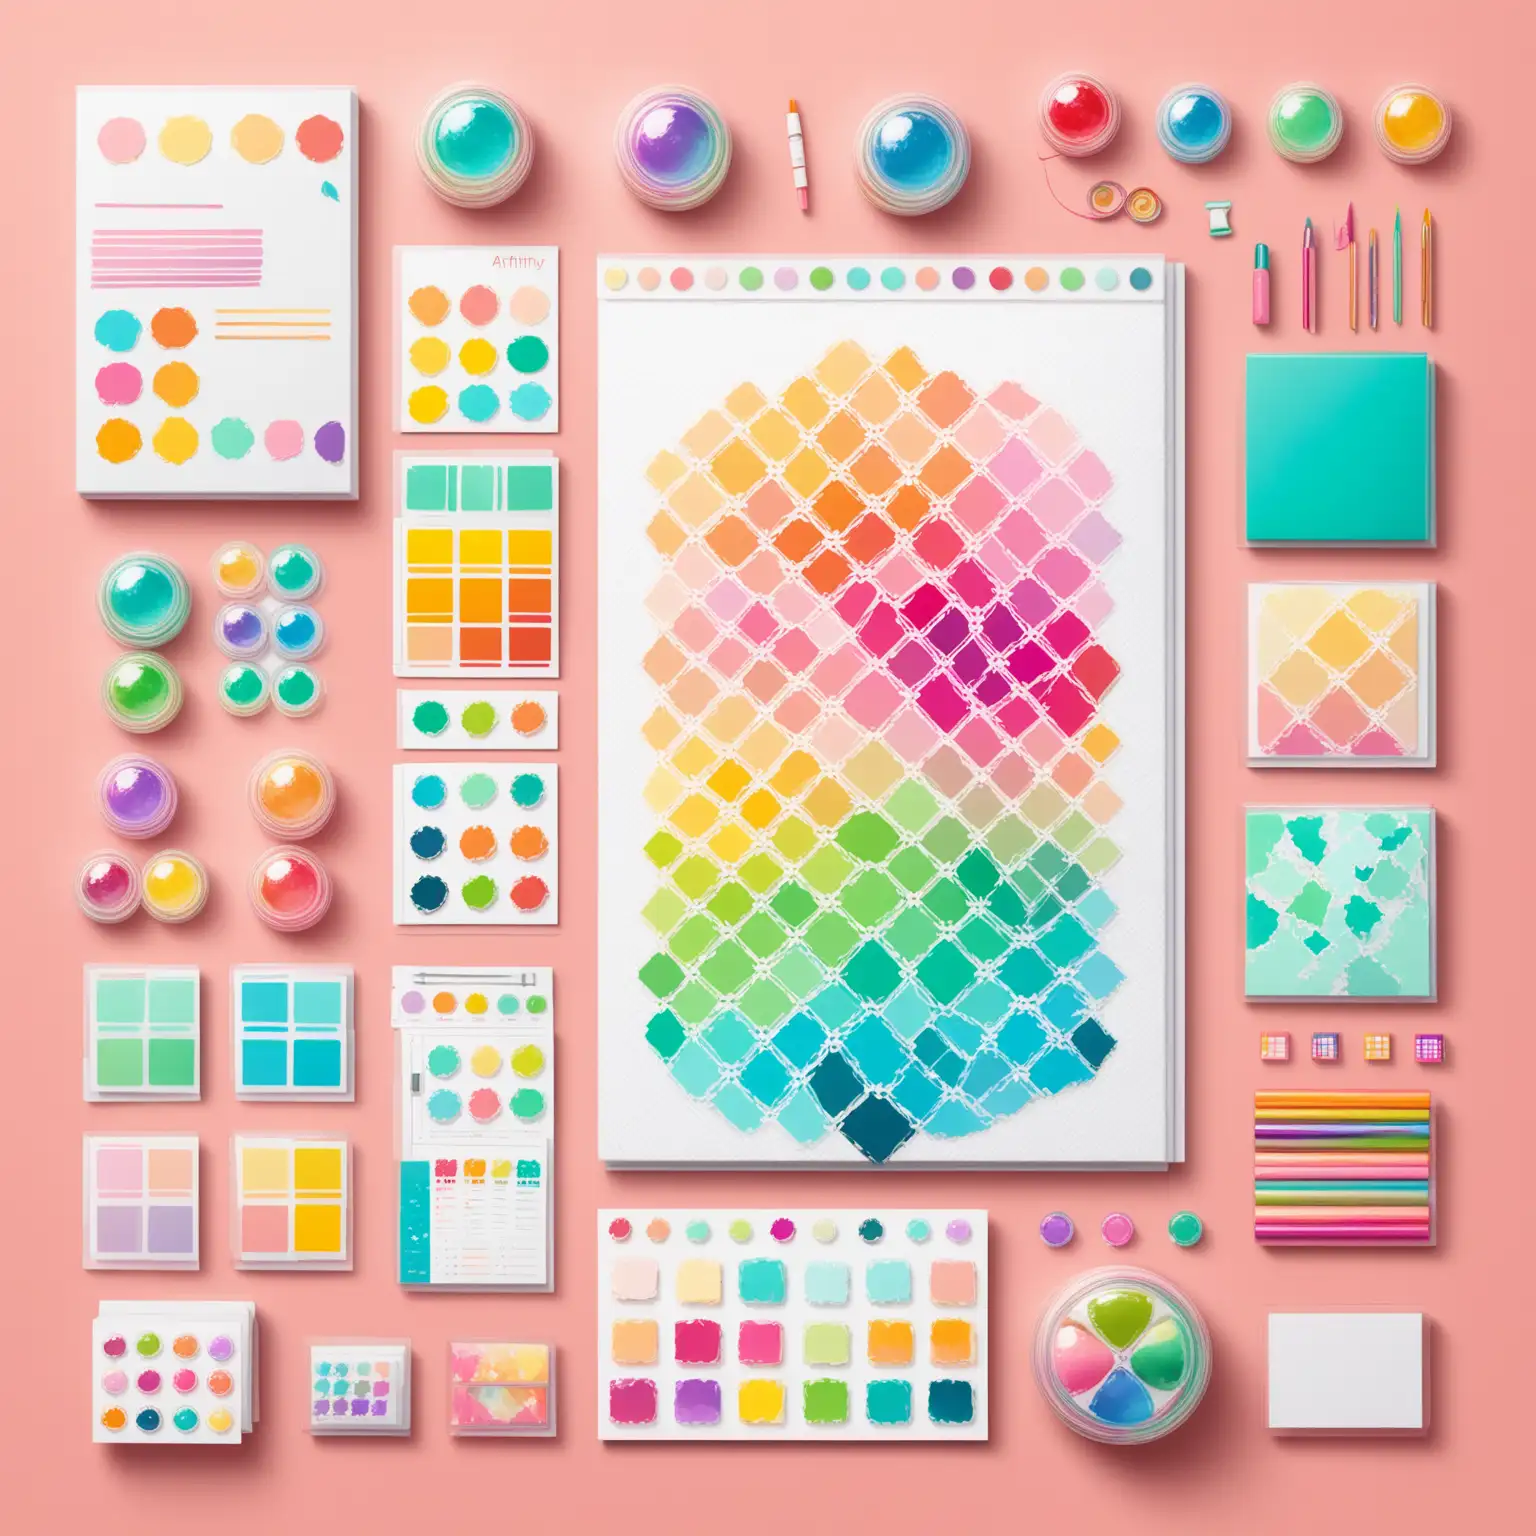 Vibrant 3D Fractal Scrapbooking Elements with Glossy and Iridescent Effects